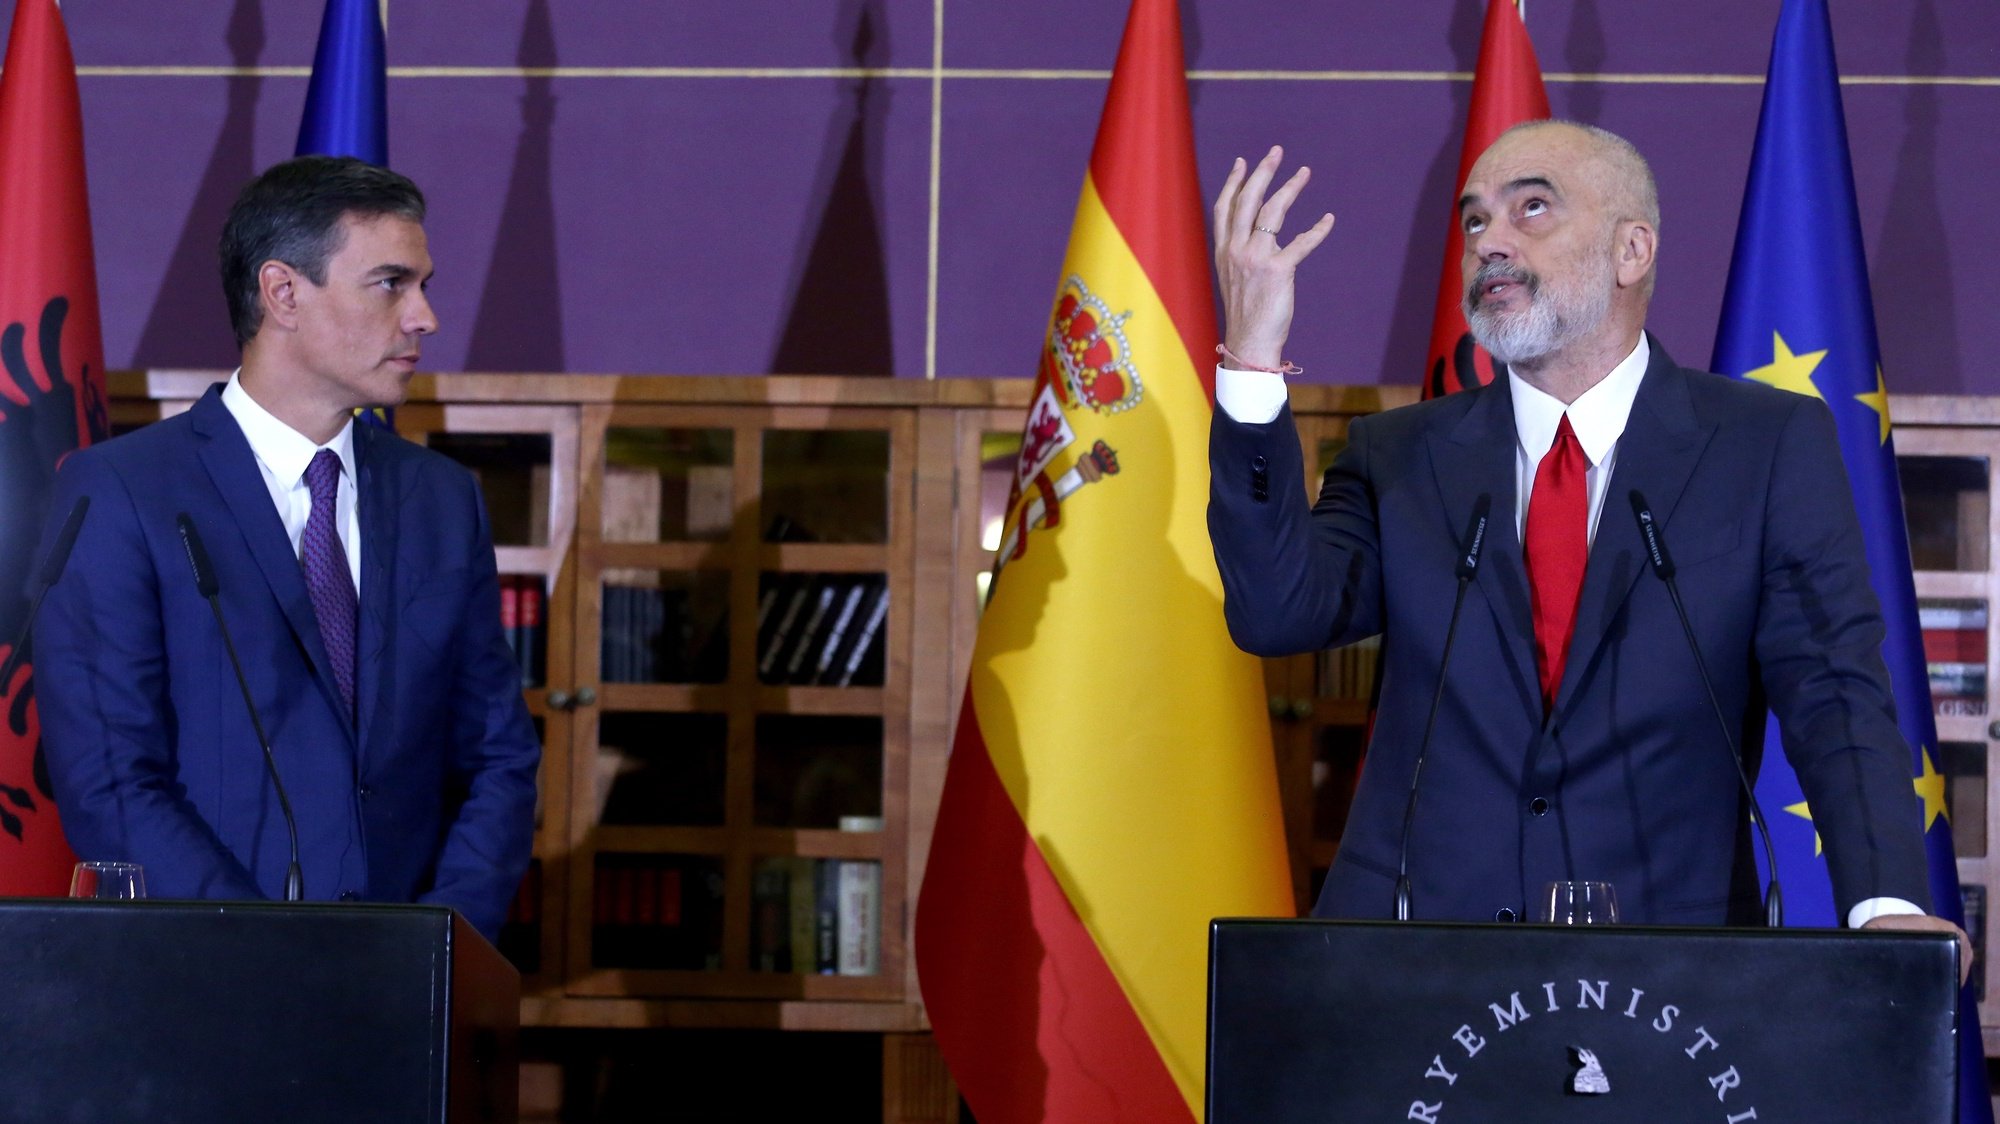 epa10101223 Spanish Prime Minister Pedro Sanchez (L) and Albanian Prime Minister Edi Rama (R) hold a joint press conference in Tirana, Albania, 01 August 2022. Sanchez is on an official visit to Albania.  EPA/MALTON DIBRA